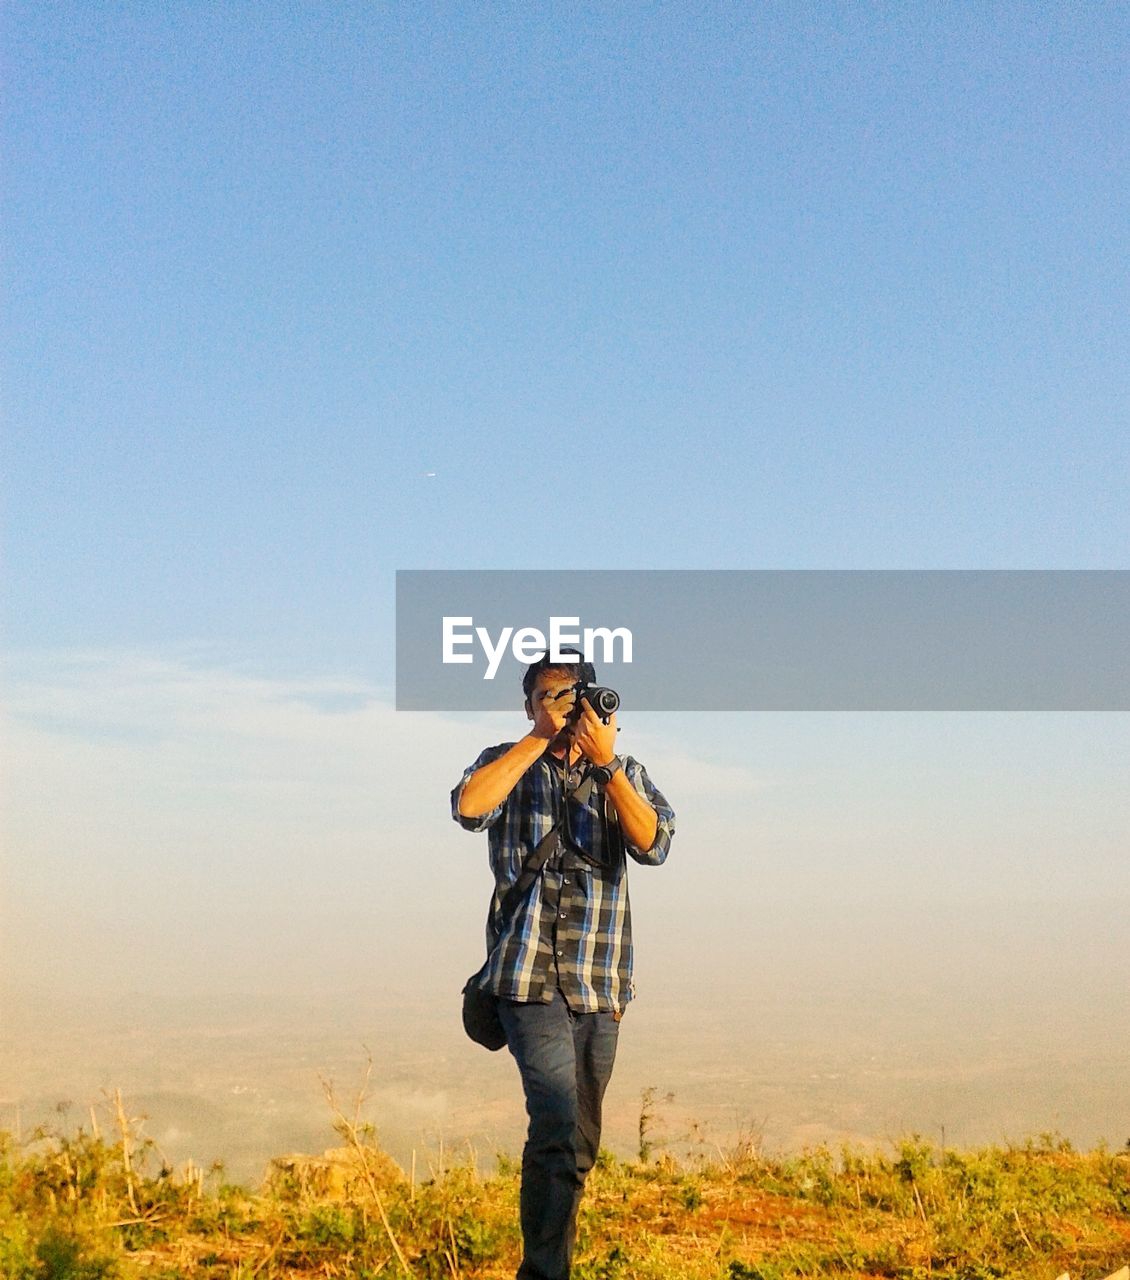 Young man photographing with digital camera on field against sky during sunset